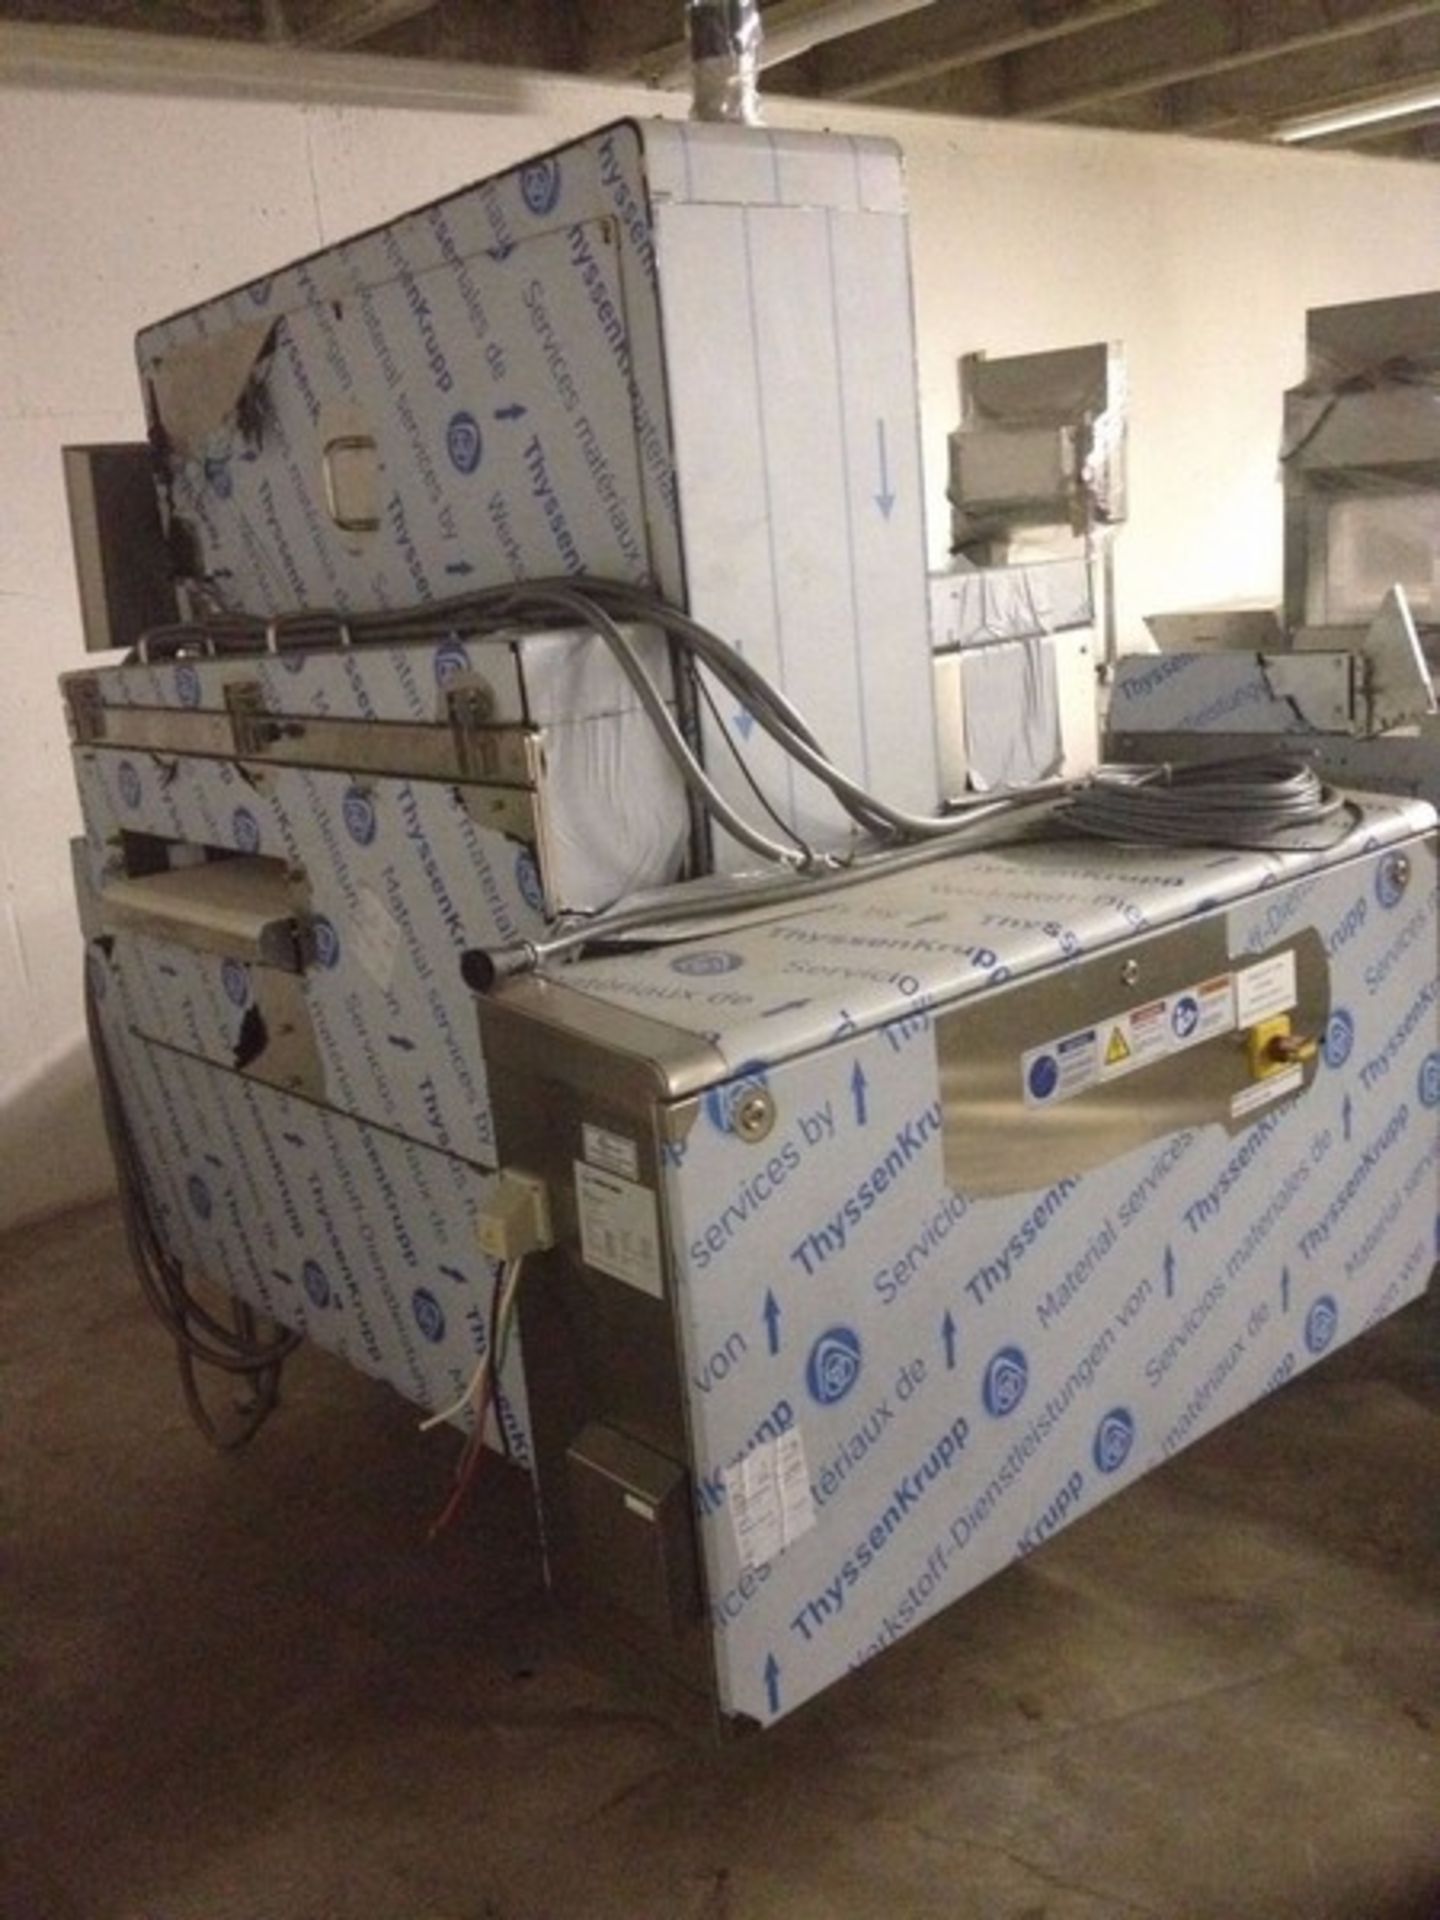 NEW 2012 MultiVac Vacuum Packager, Type: H050, S/N 158612, 208/120 Volts (LOCATED IN BELTSVILLE, MD) - Image 14 of 14